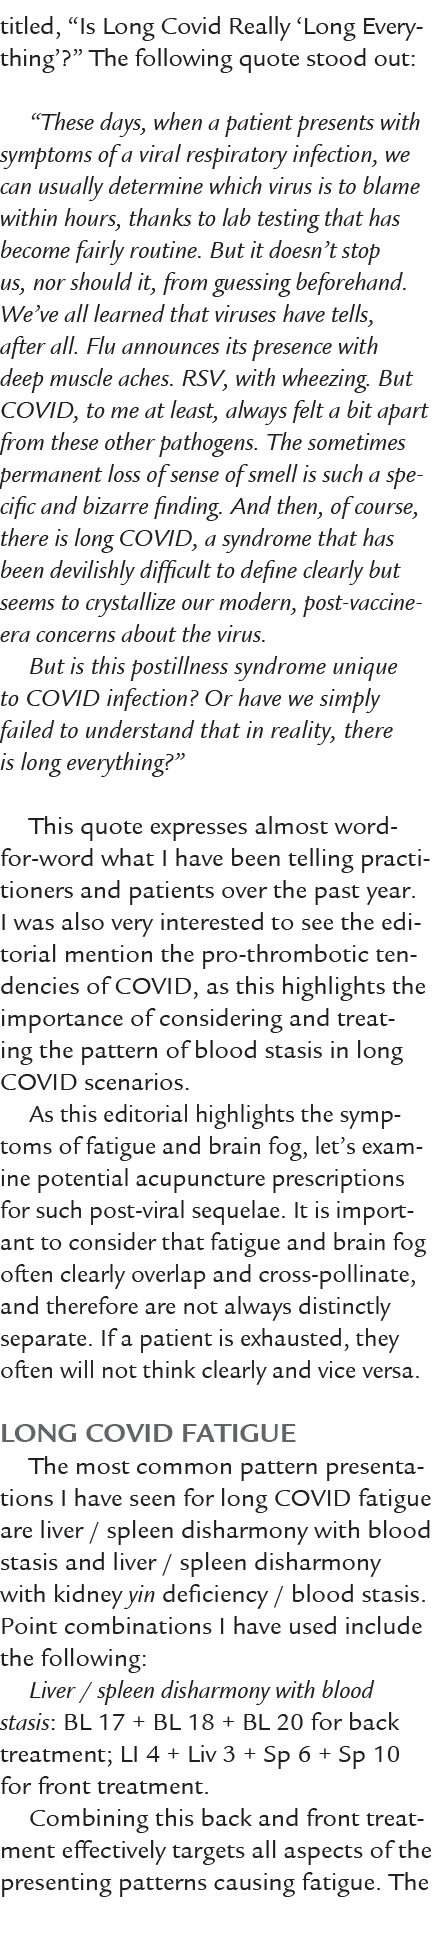 titled, “Is Long Covid Really ‘Long Everything’?” The following quote stood out: “These days, when a patient presents...